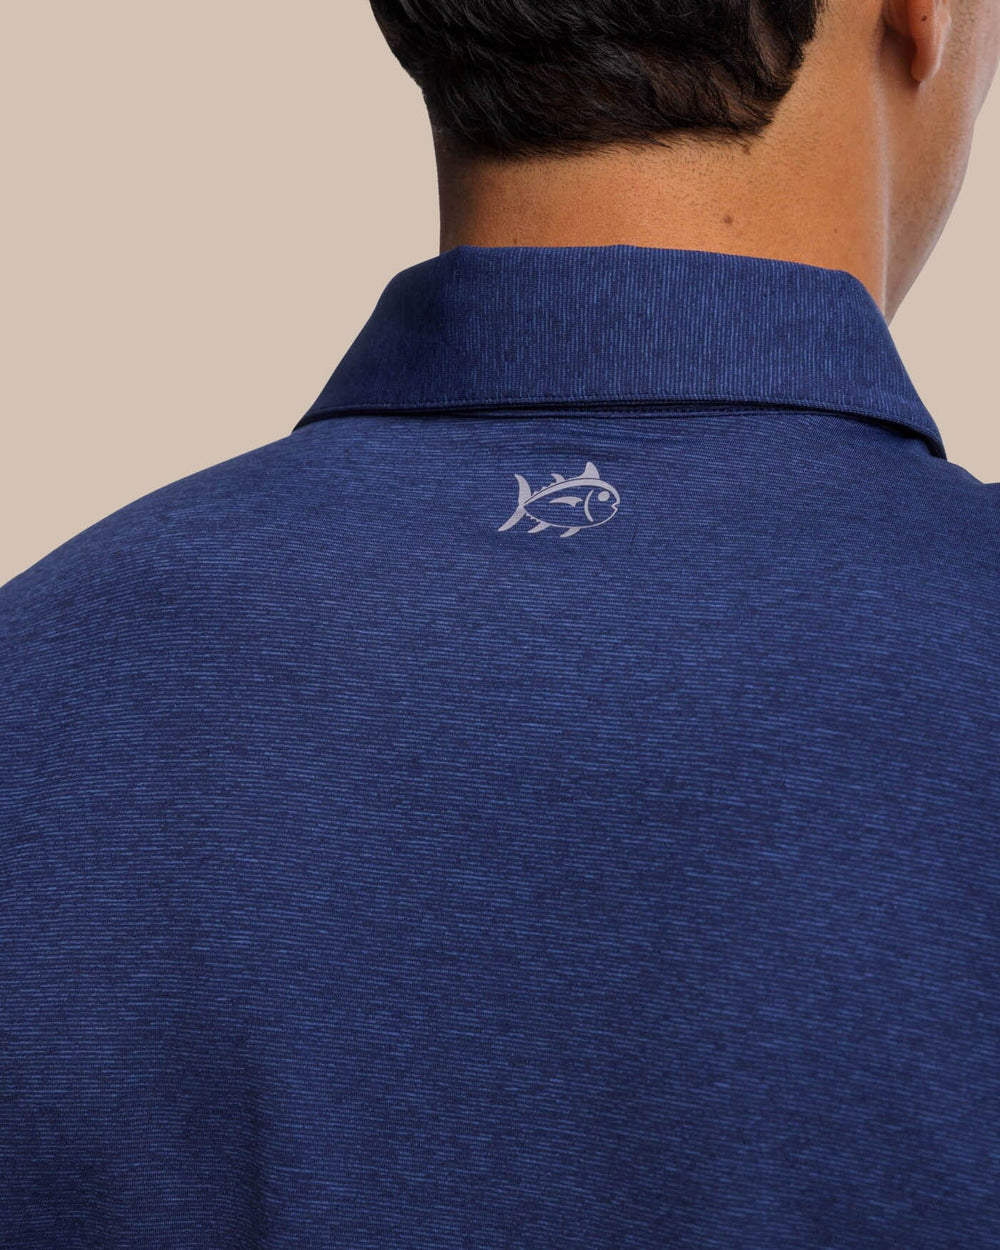 The yoke view of the brrr°®-eeze Heather Performance Polo Shirt by Southern Tide - Heather Nautical Navy